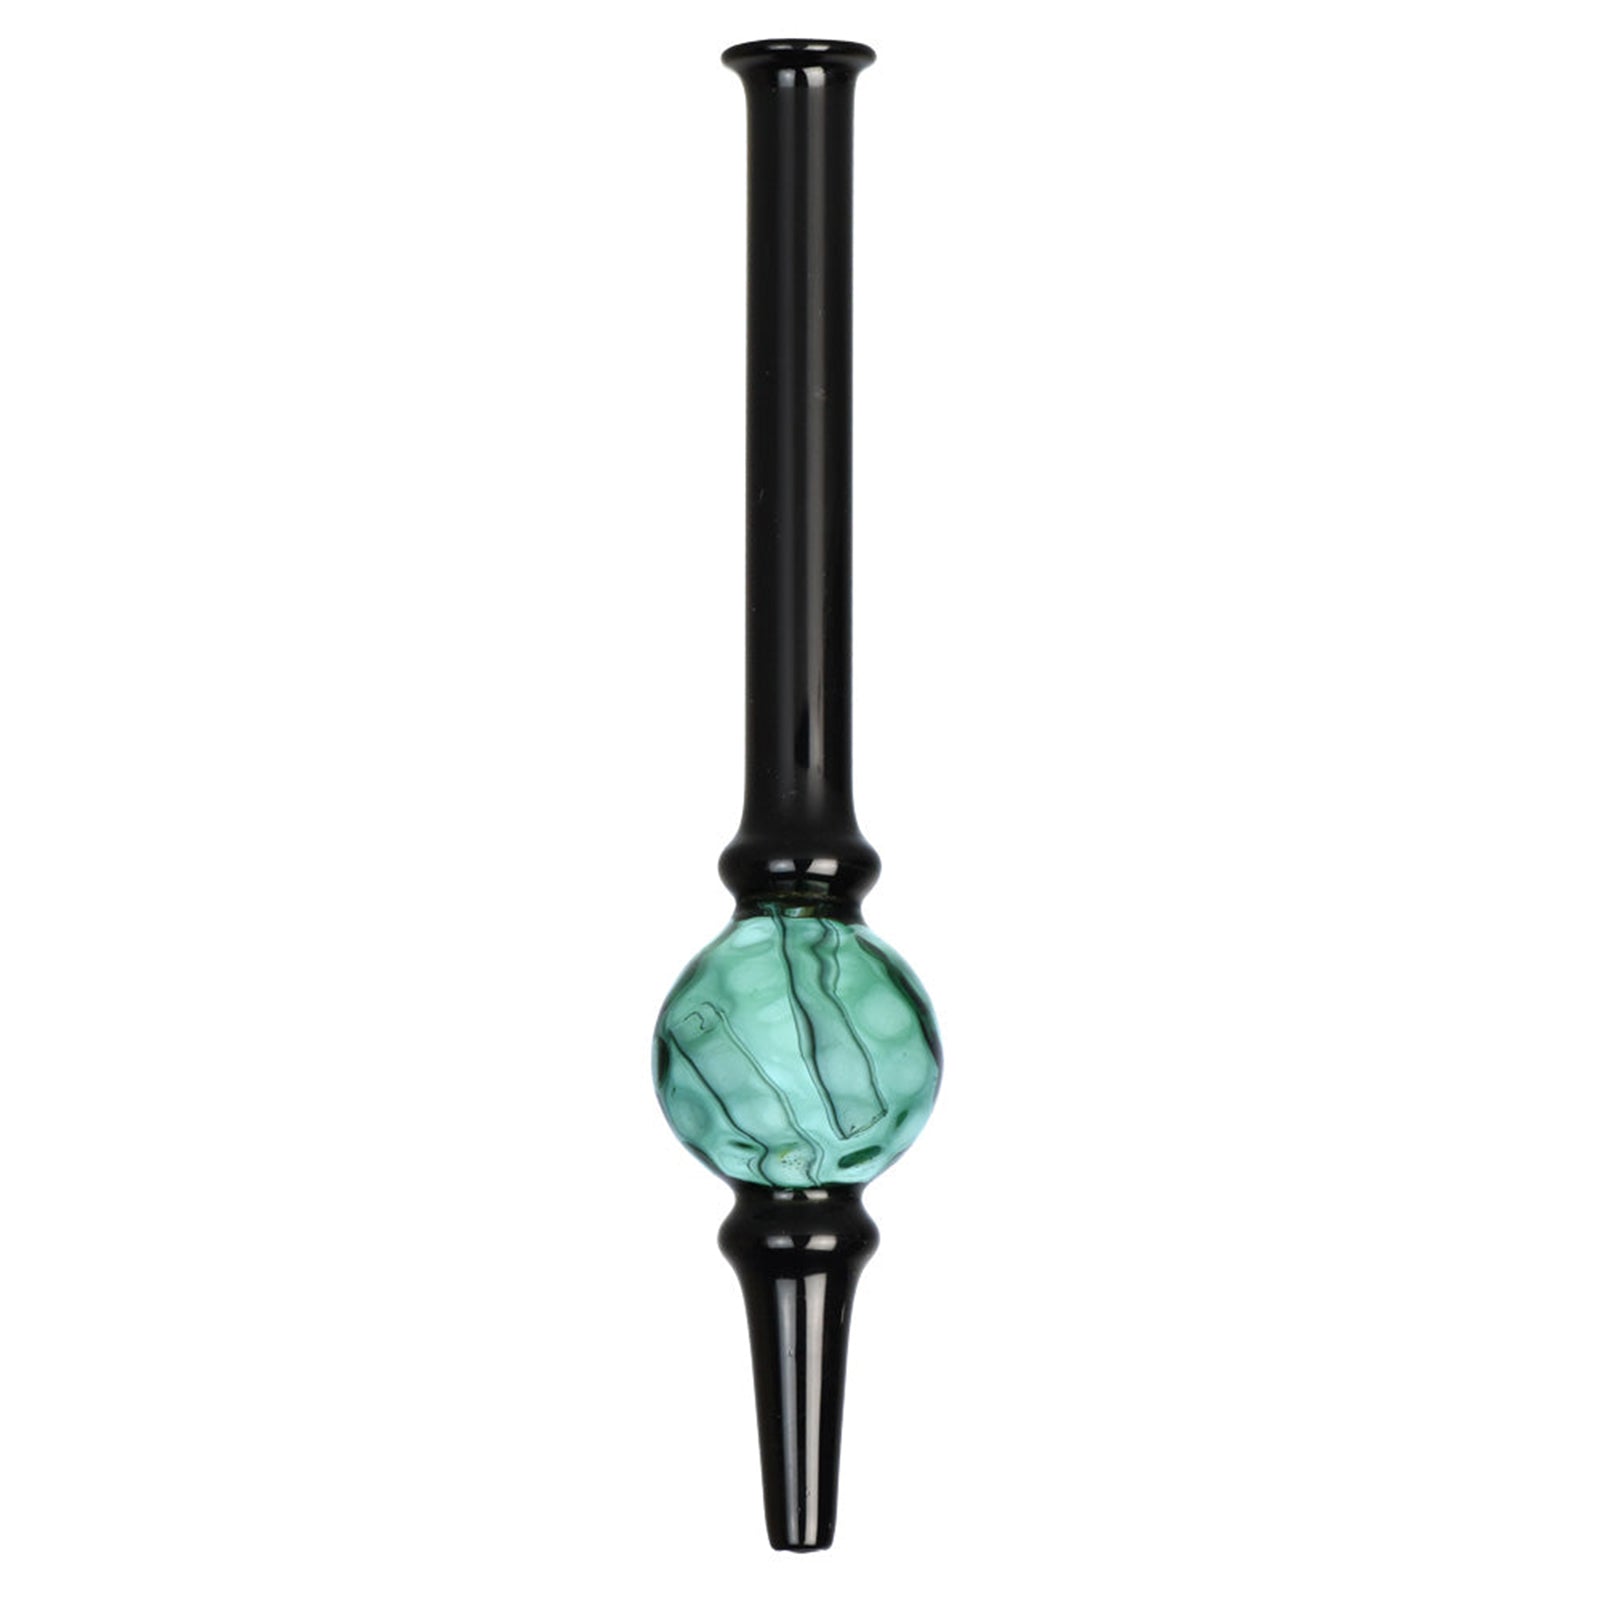 6.5&quot; Nectar Collector Glass Straw with Chamber - INHALCO